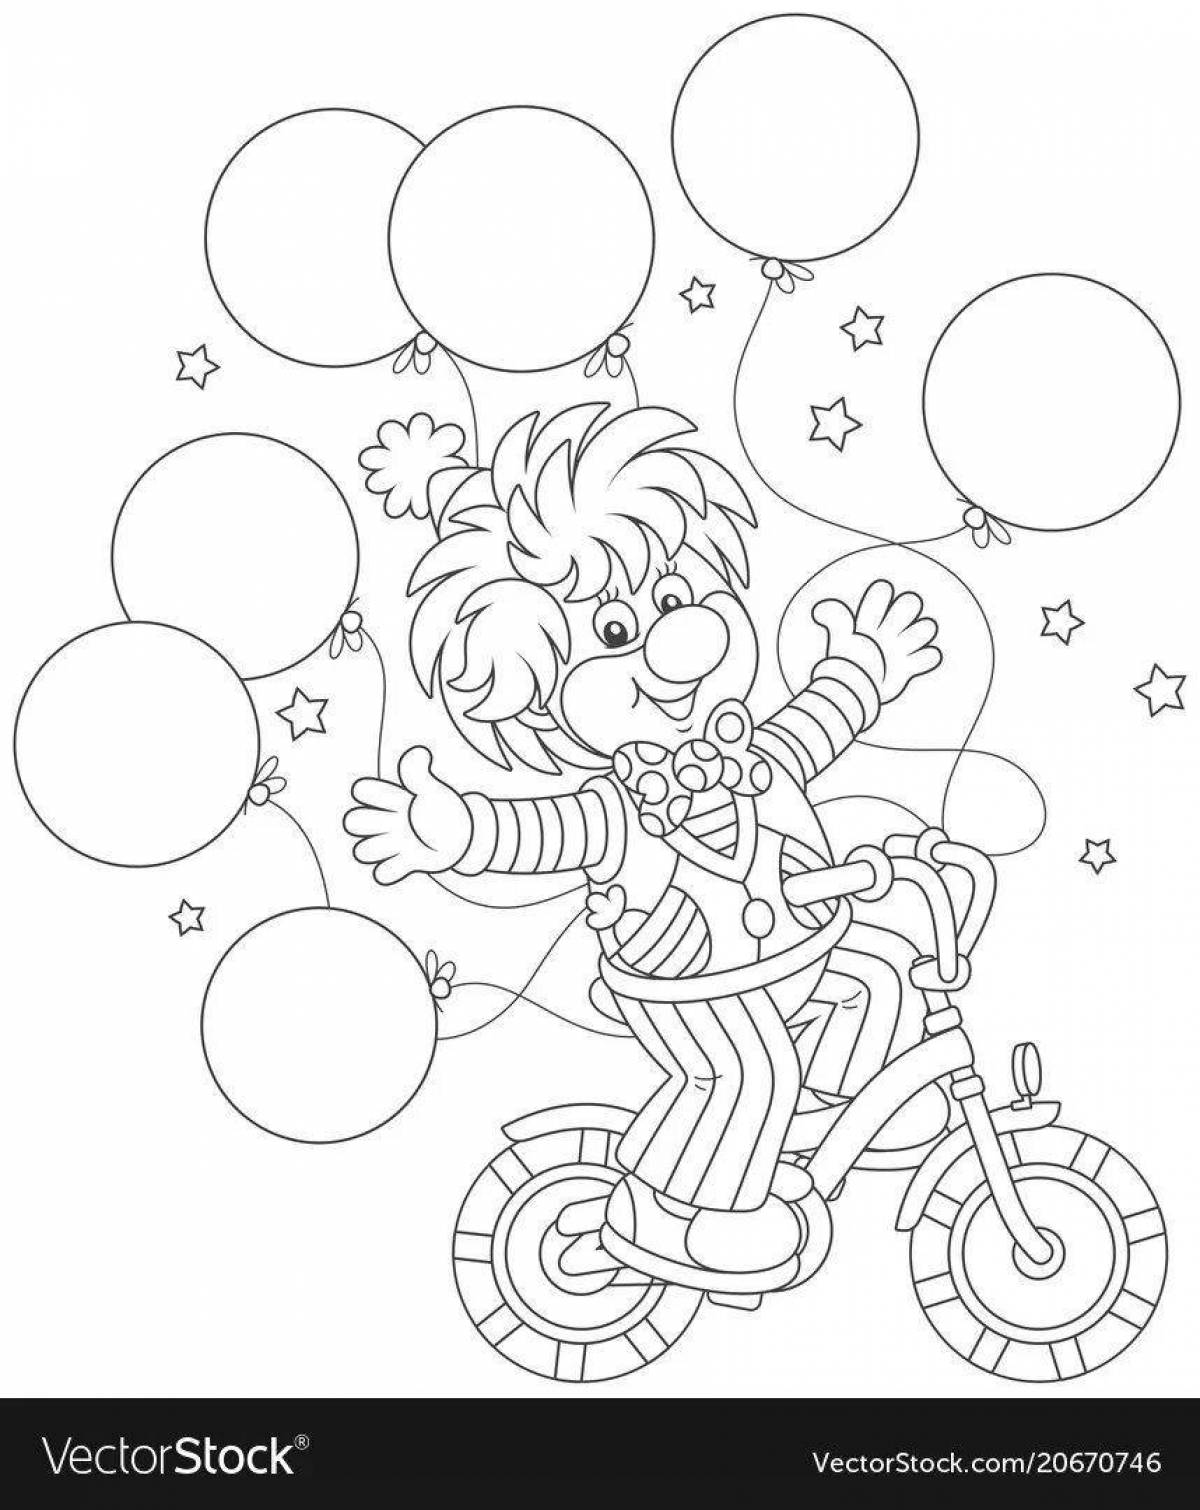 Giggling clown with balloons